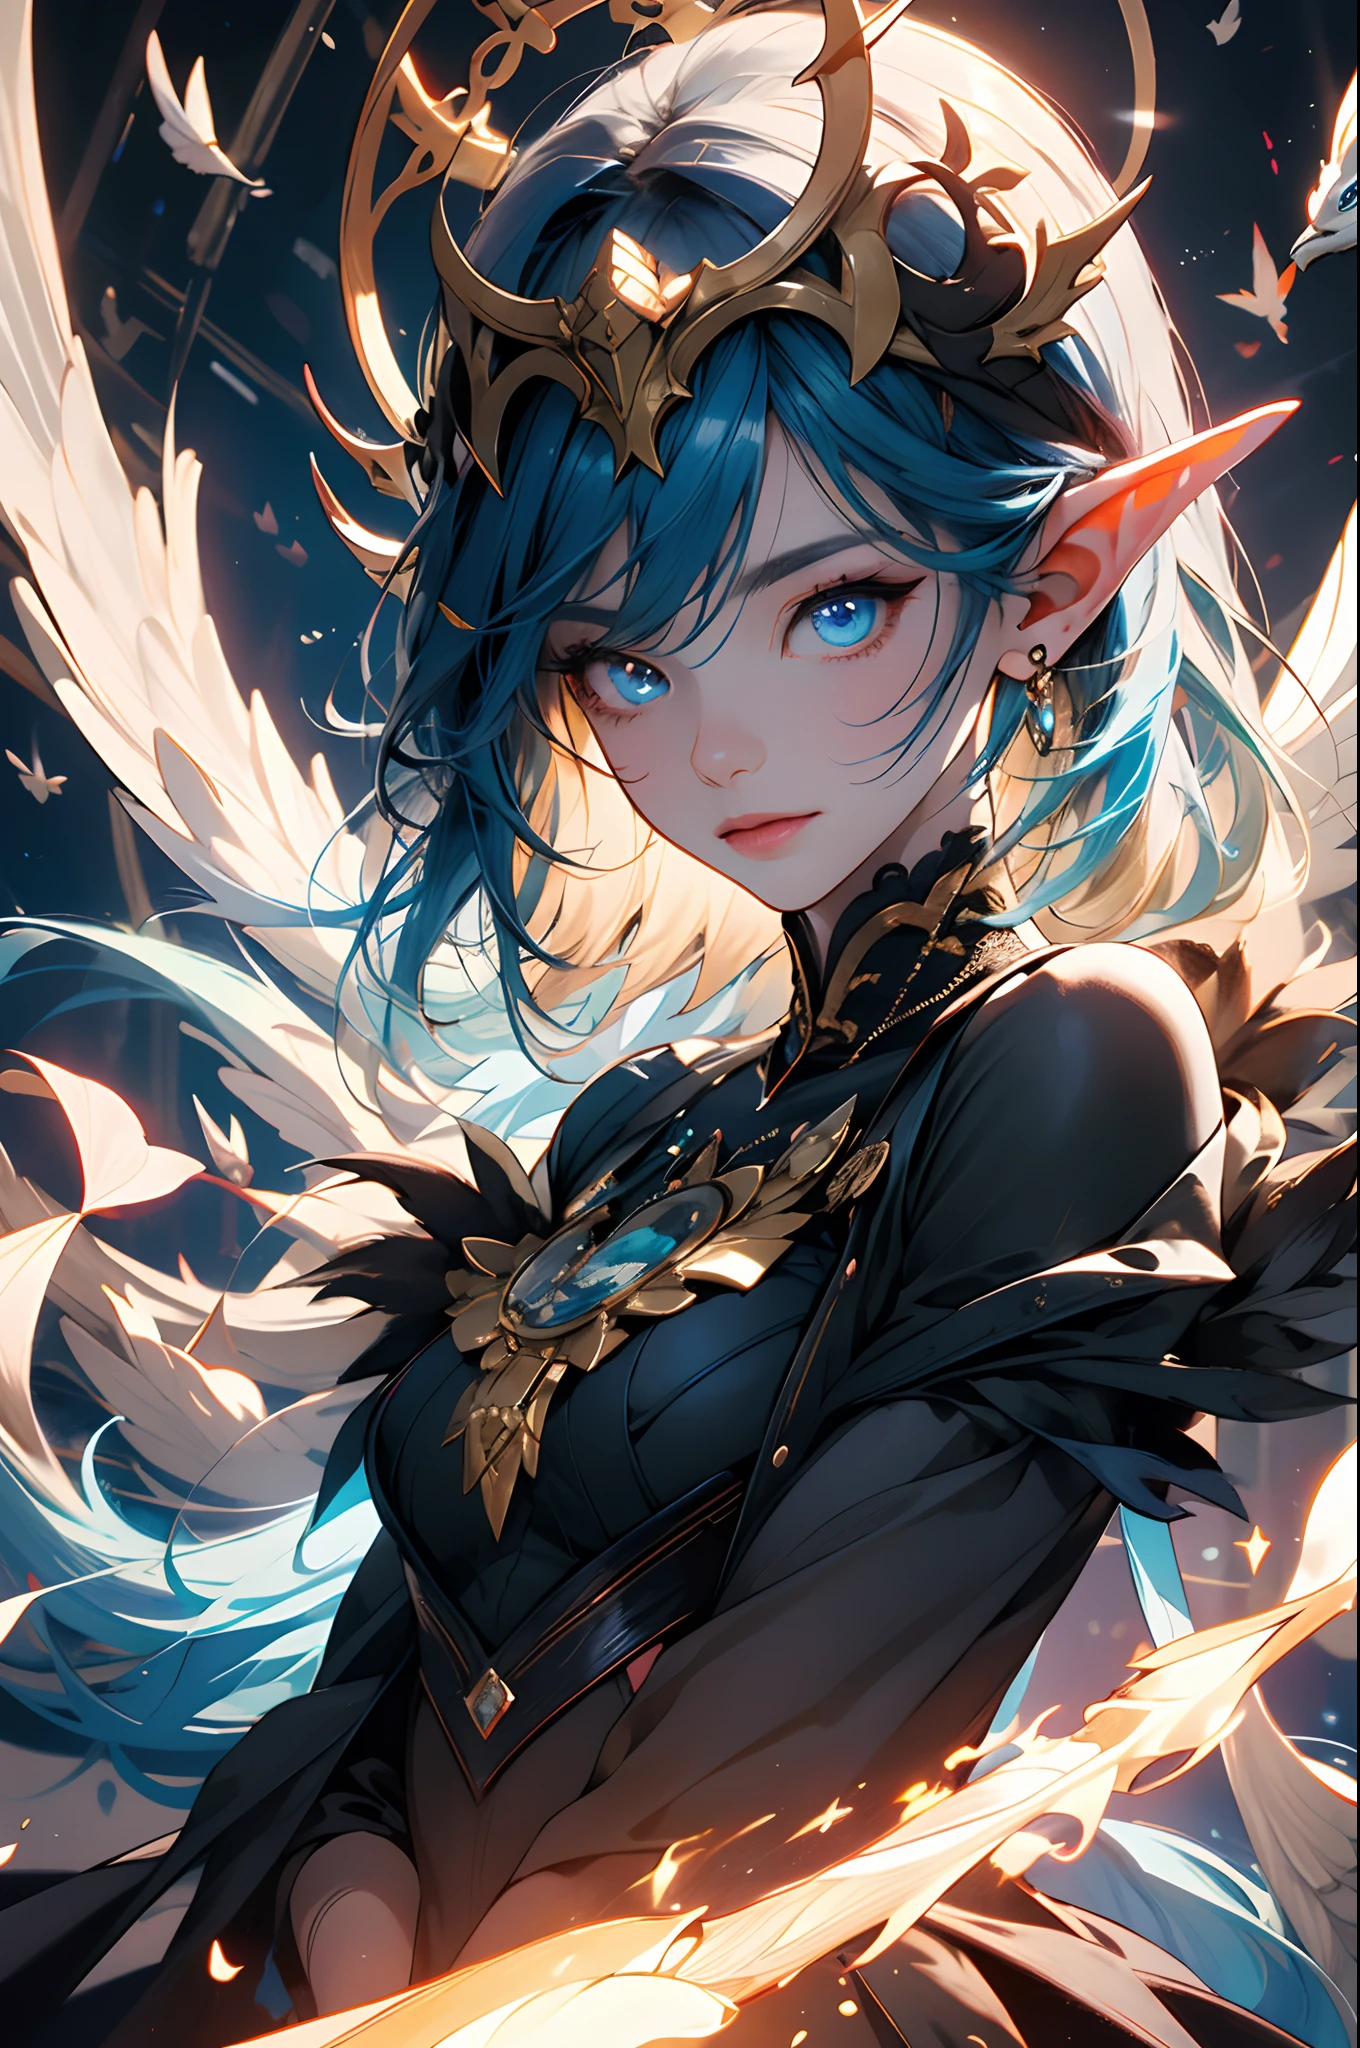 death,Blood,Night, Dark, (fantasy),unlimited,Deep blue sky,The abyss of knowledge,knowledge,((Masterpiece)), (((Best quality))),((Beautiful detailed eyes)),(eyelash),Monster,(1 girl),Blue hair,Long hair,abyss eyes,Shiny skin,oil,Small breast,(Bird body,feater),wearing rags, Zeenchi,elf,Extremely detailed Cg Unity 8K wallpaper,Masterpiece, ((Ultra-detailed)), ((illustration)),Colorful,the wallpaper,energy,Unknown terror,Arcane,Around the magic,Magic surrounds,wands,book,The pages of the book flew all over the sky,Know it all,Predicting the future,Learn about the past,Infinite wisdom,Blue Flame,Warlock,Magical Circle,pentacle,incantation,mantra,Singing magic,